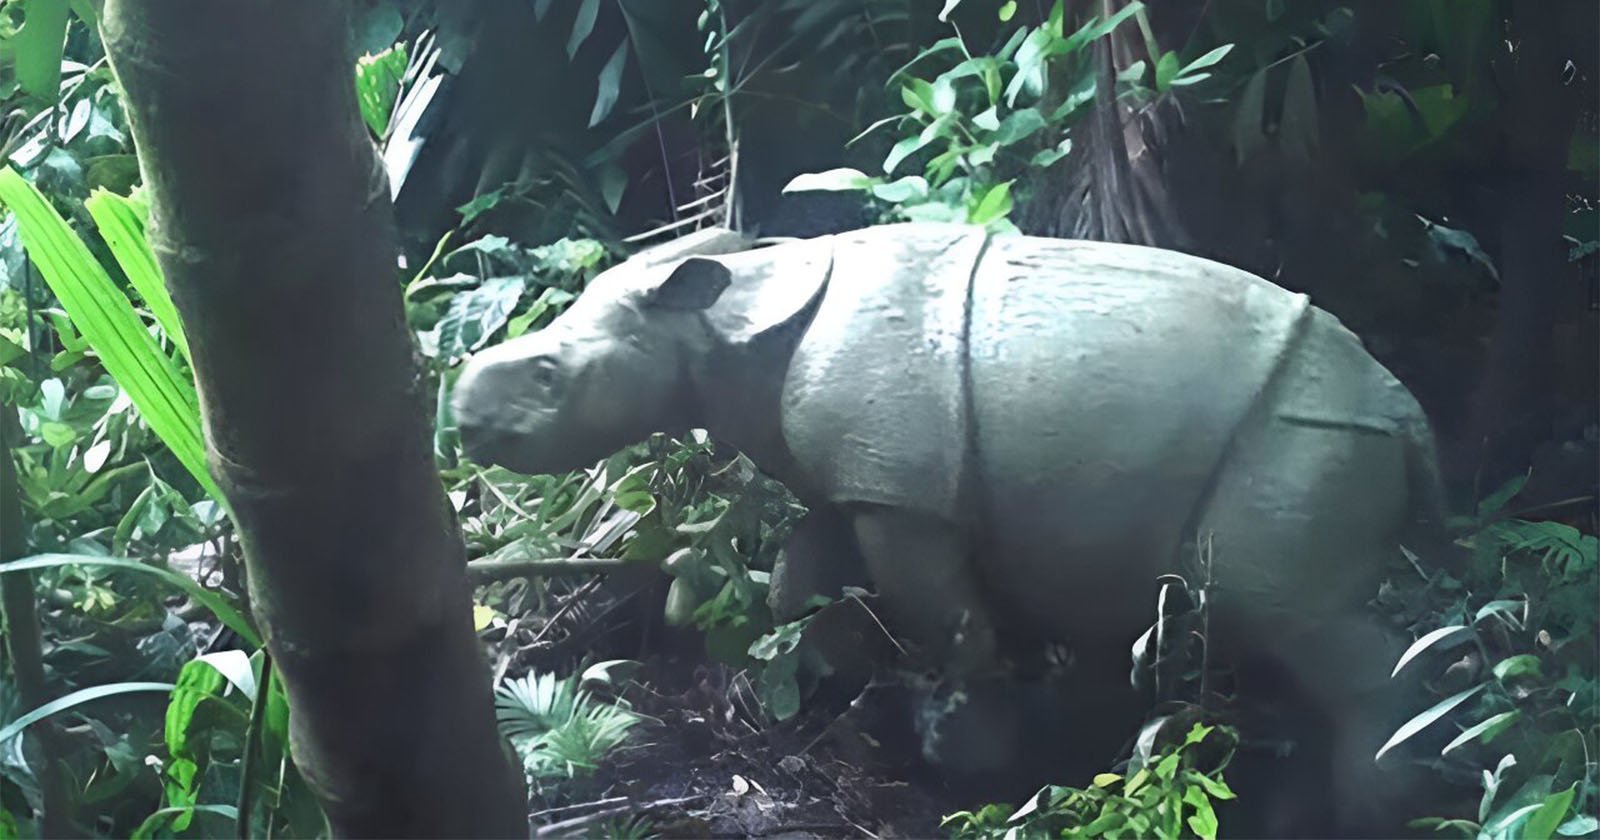 Adorable Javan Rhino Calf Caught on Camera, One of About 80 Still Alive